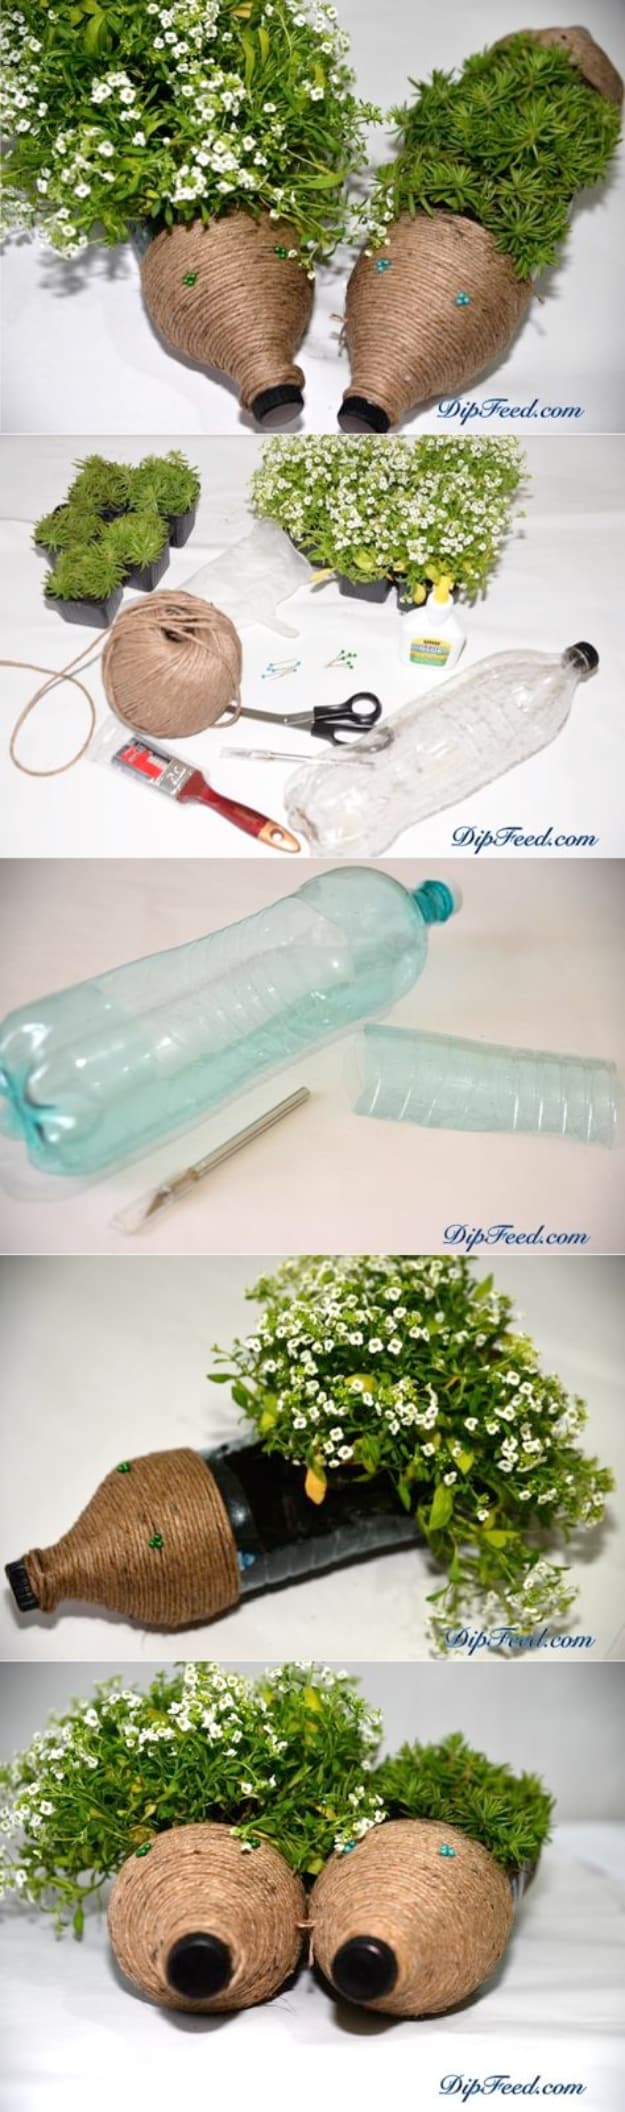 Cool DIY Projects Made With Plastic Bottles - Cute Hedgehog Planters - Best Easy Crafts and DIY Ideas Made With A Recycled Plastic Bottle - Jewlery, Home Decor, Planters, Craft Project Tutorials - Cheap Ways to Decorate and Creative DIY Gifts for Christmas Holidays - Fun Projects for Adults, Teens and Kids 